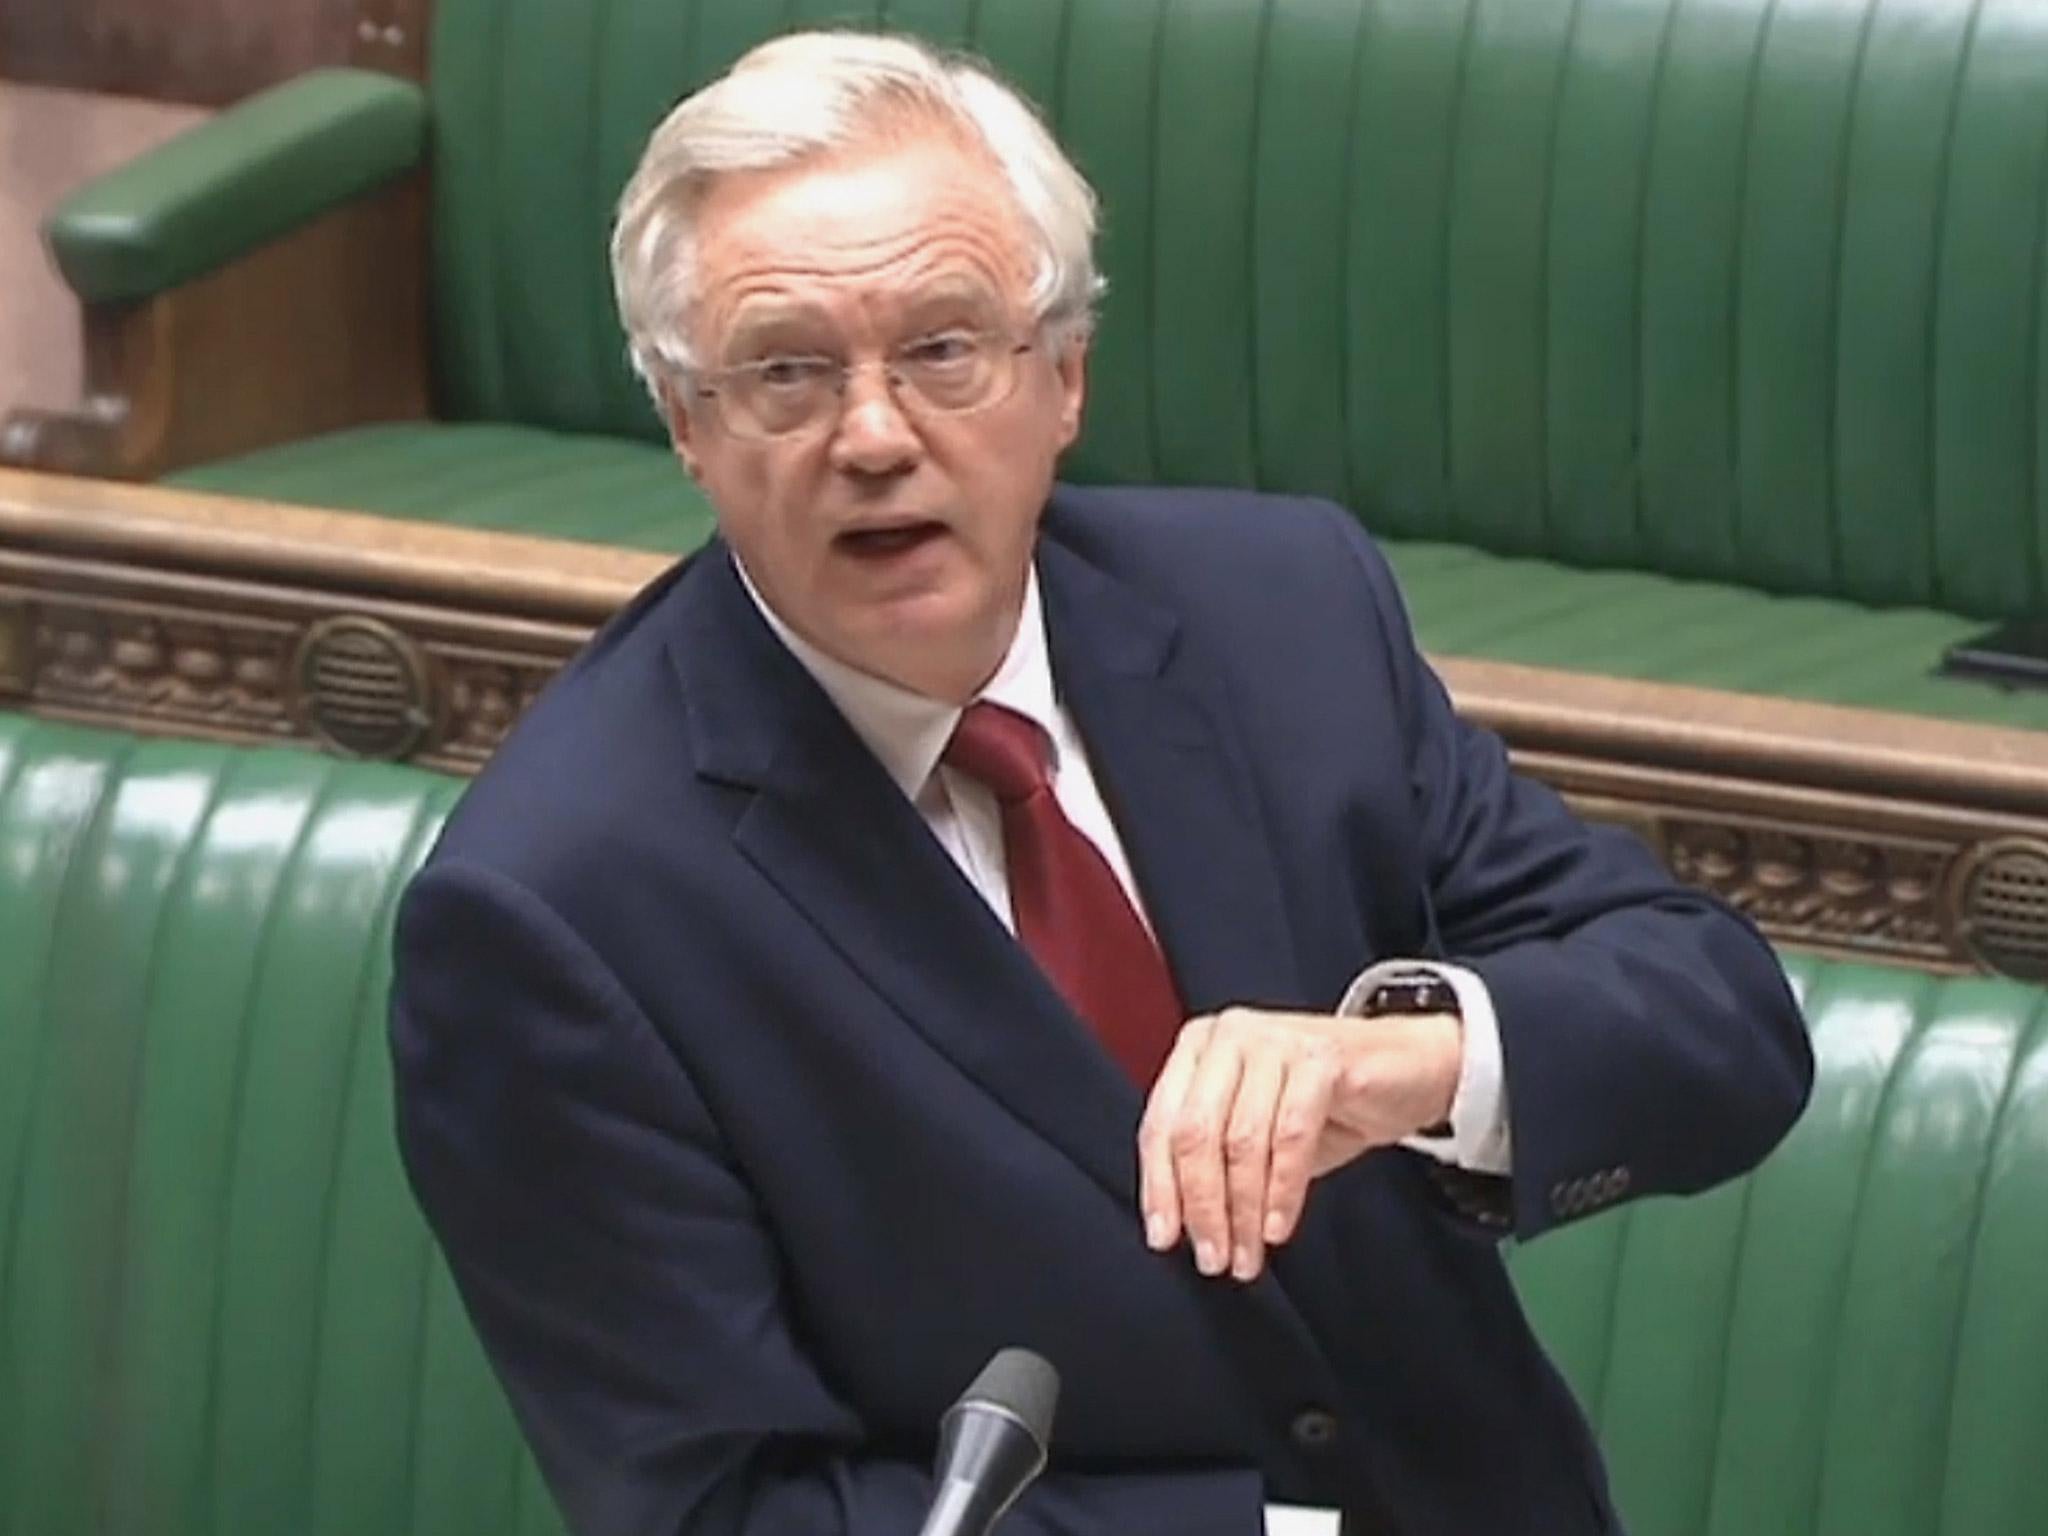 David Davis, the Brexit Secretary, also signalled that transitional arrangements are under discussion to protect the City